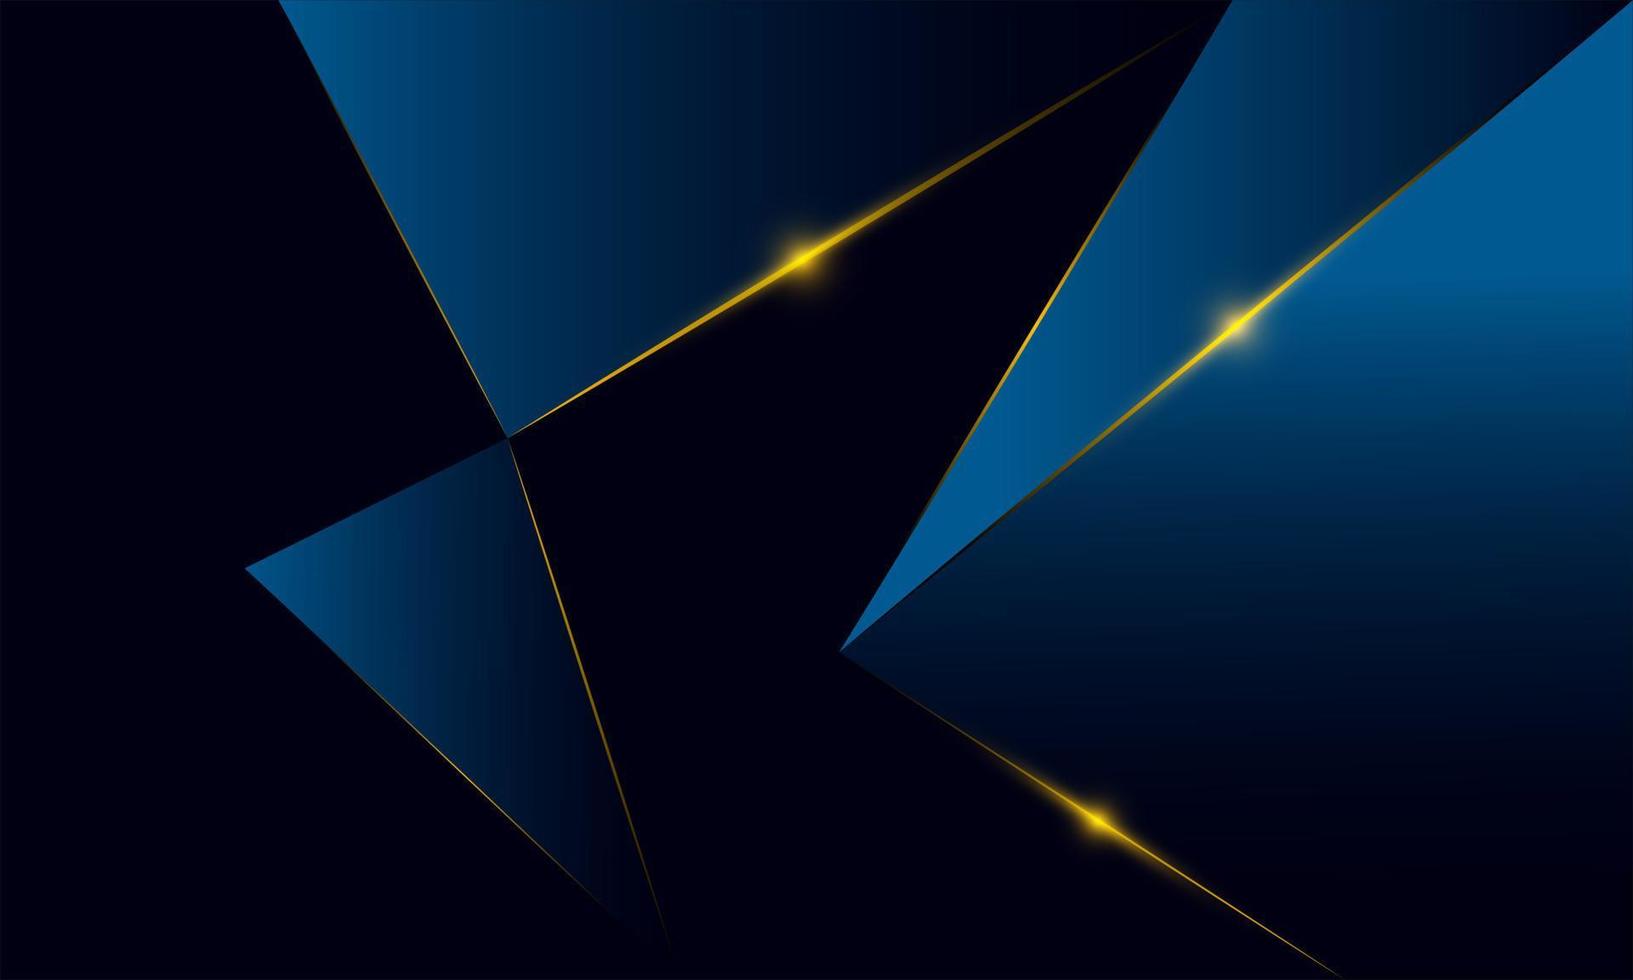 Abstract blue polygon triangles shape pattern background with lighting effect luxury style. Illustration Vector design digital technology concept.